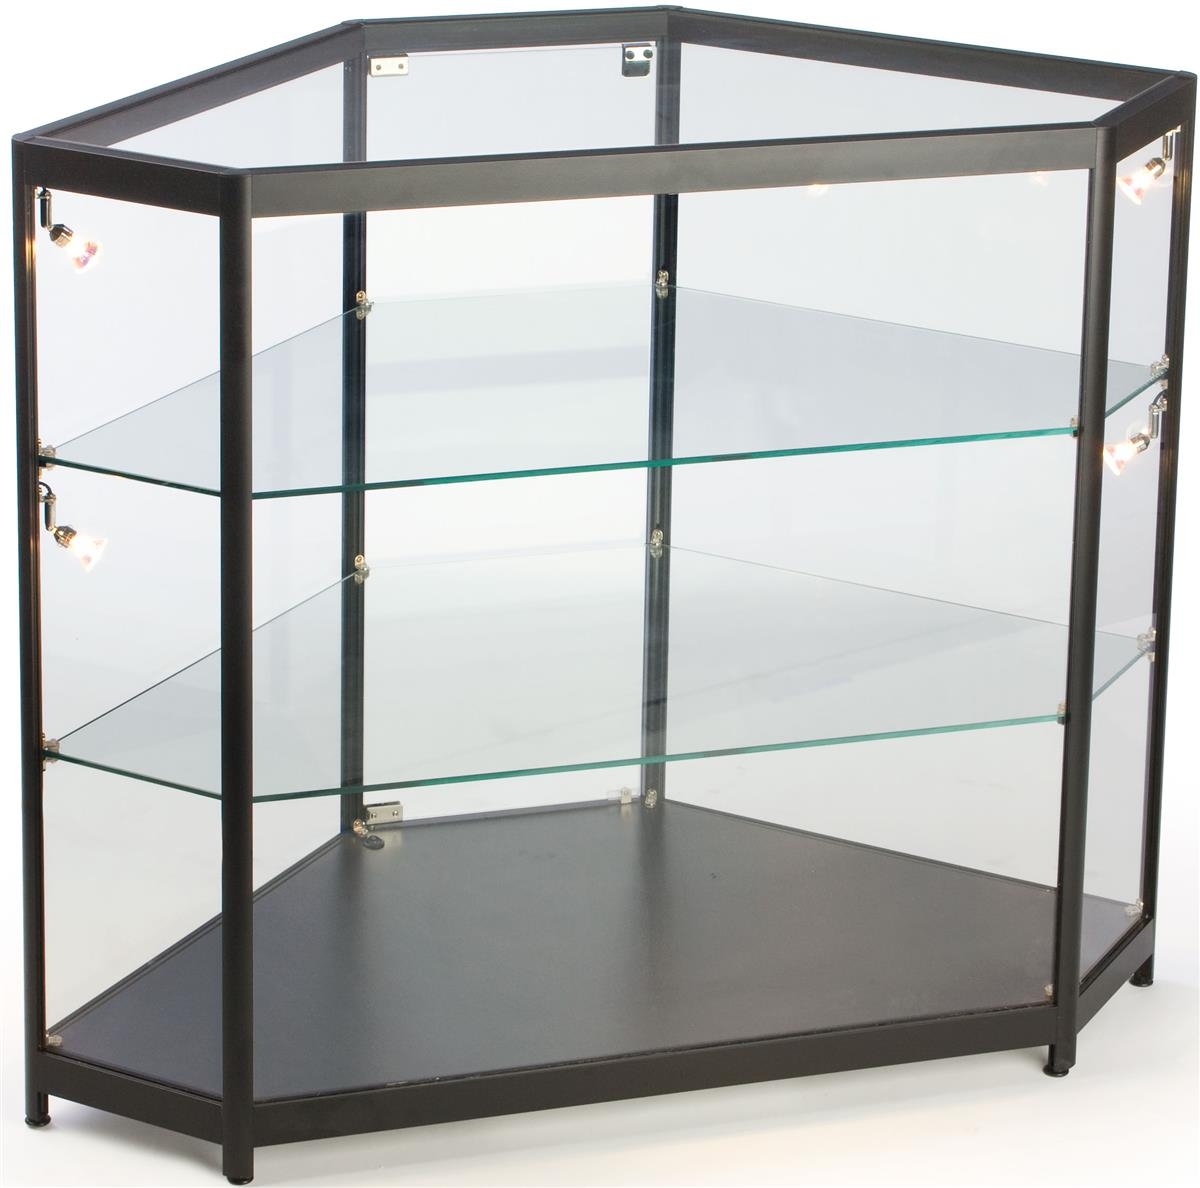 Hexagon Shaped Corner Display Cabinet, With Aluminum Extrusions And Black Laminate Base